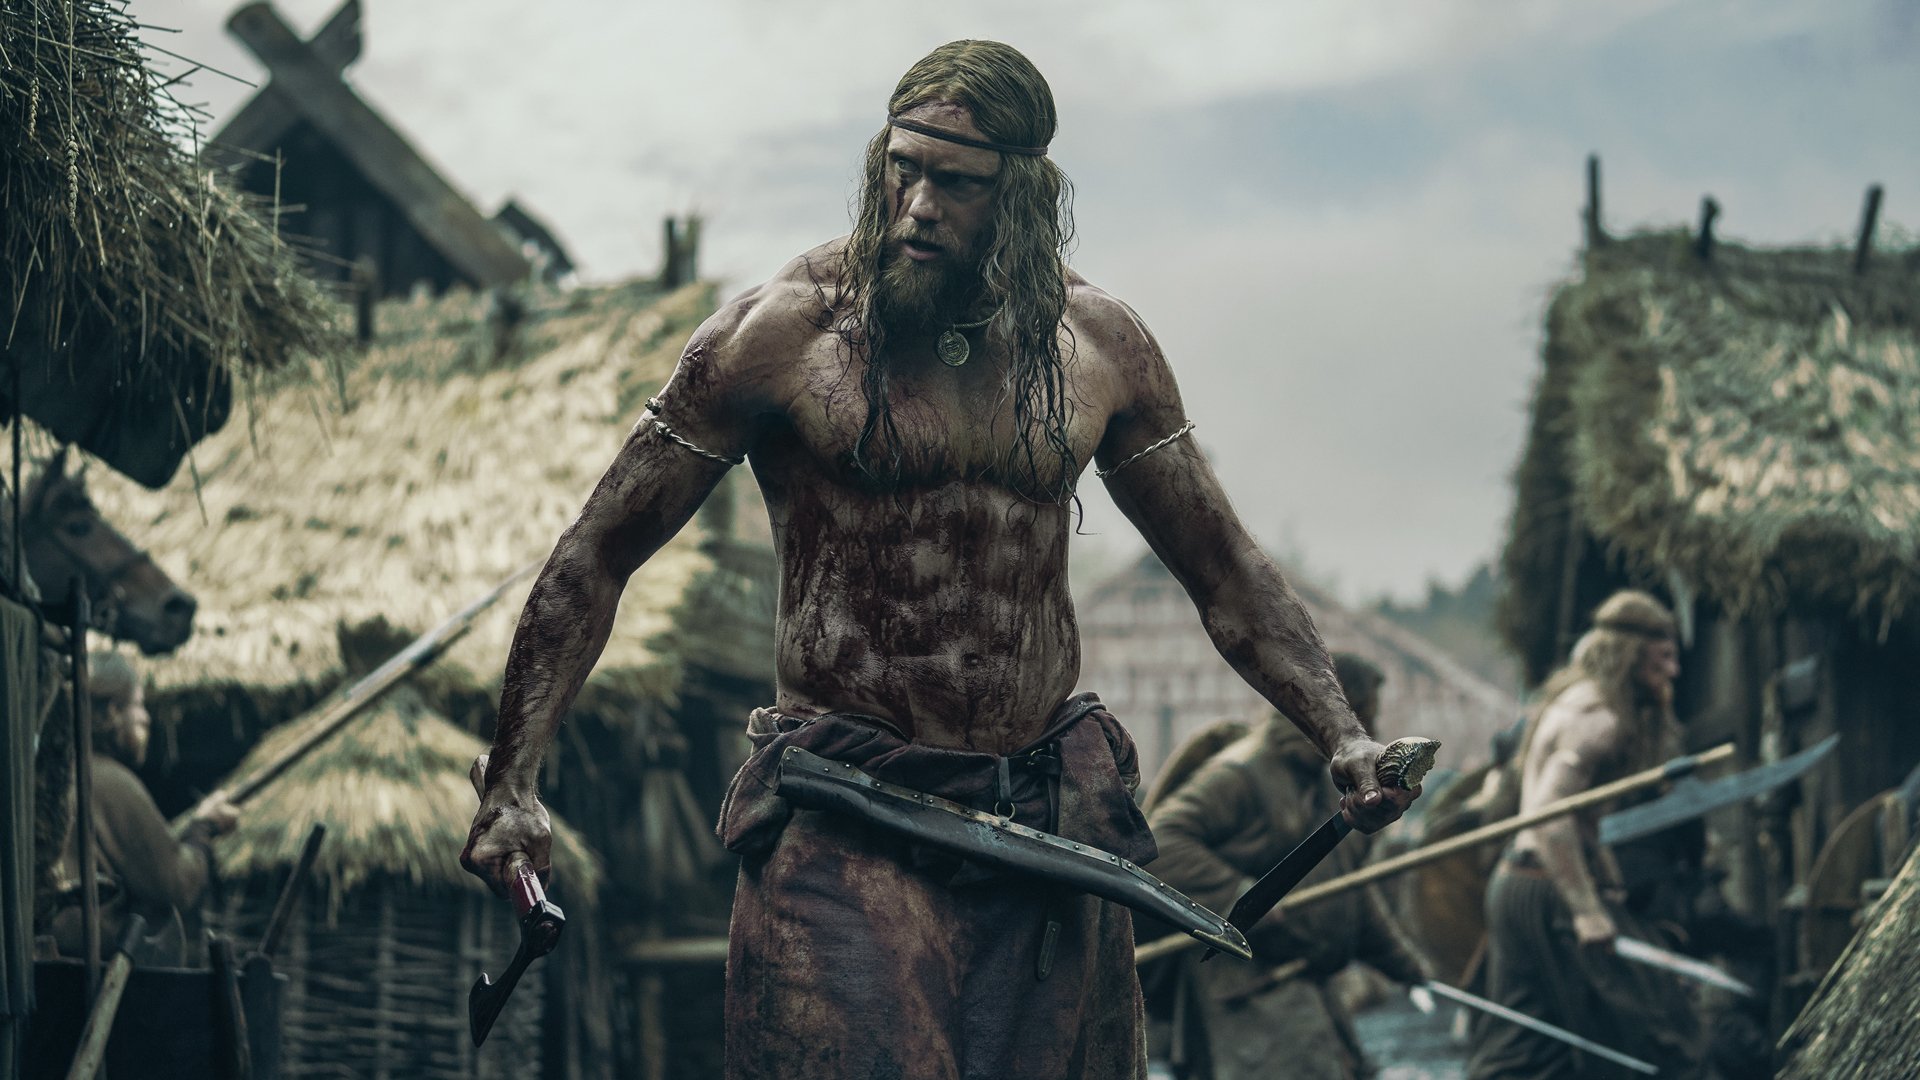 A viking stands in the middle of a village raid, covered in blood.